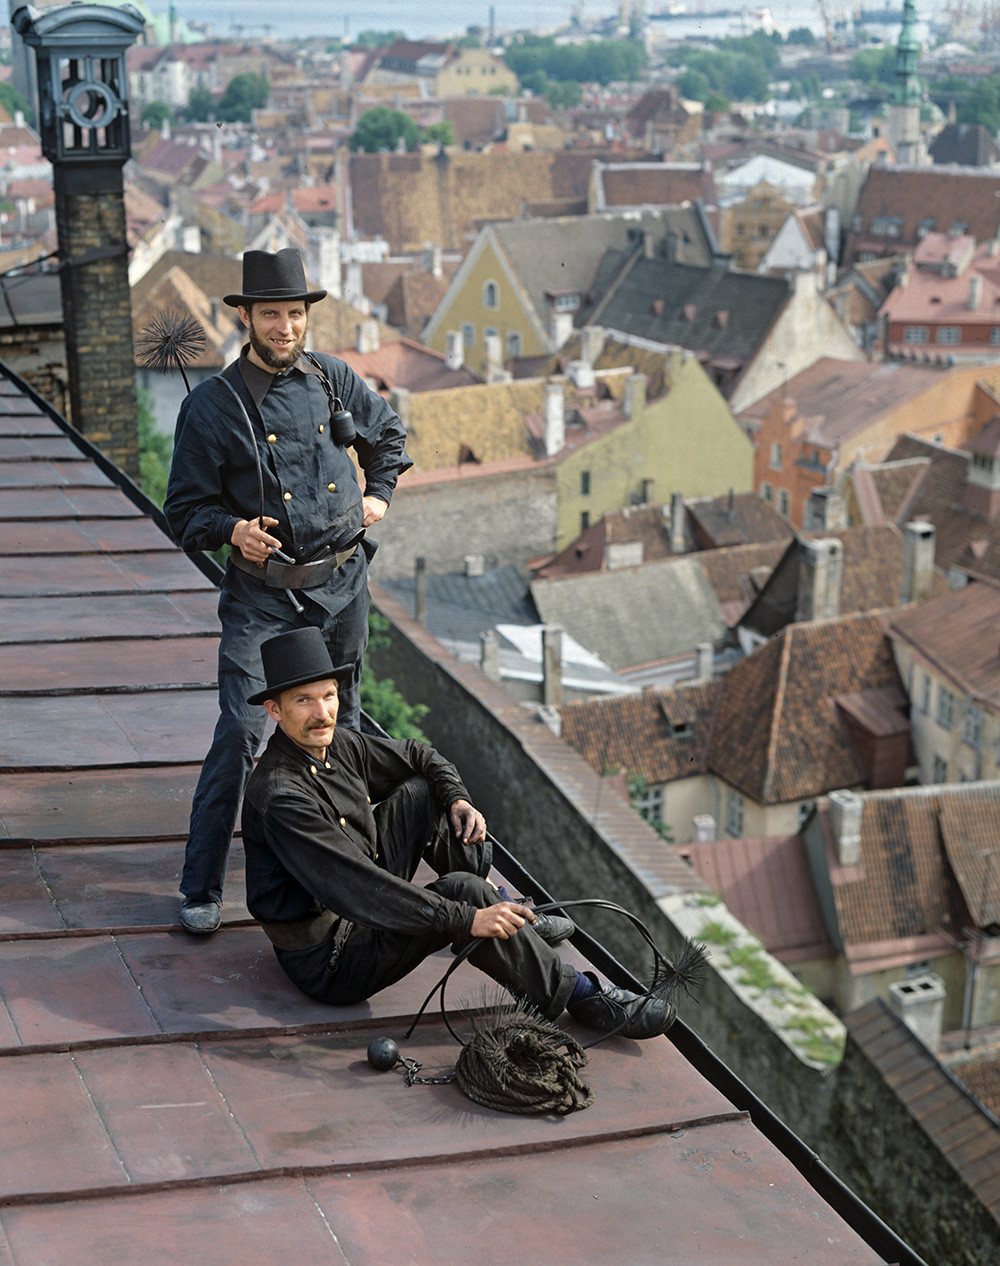 Chimney sweepers on a roof in Tallinn, 1984.